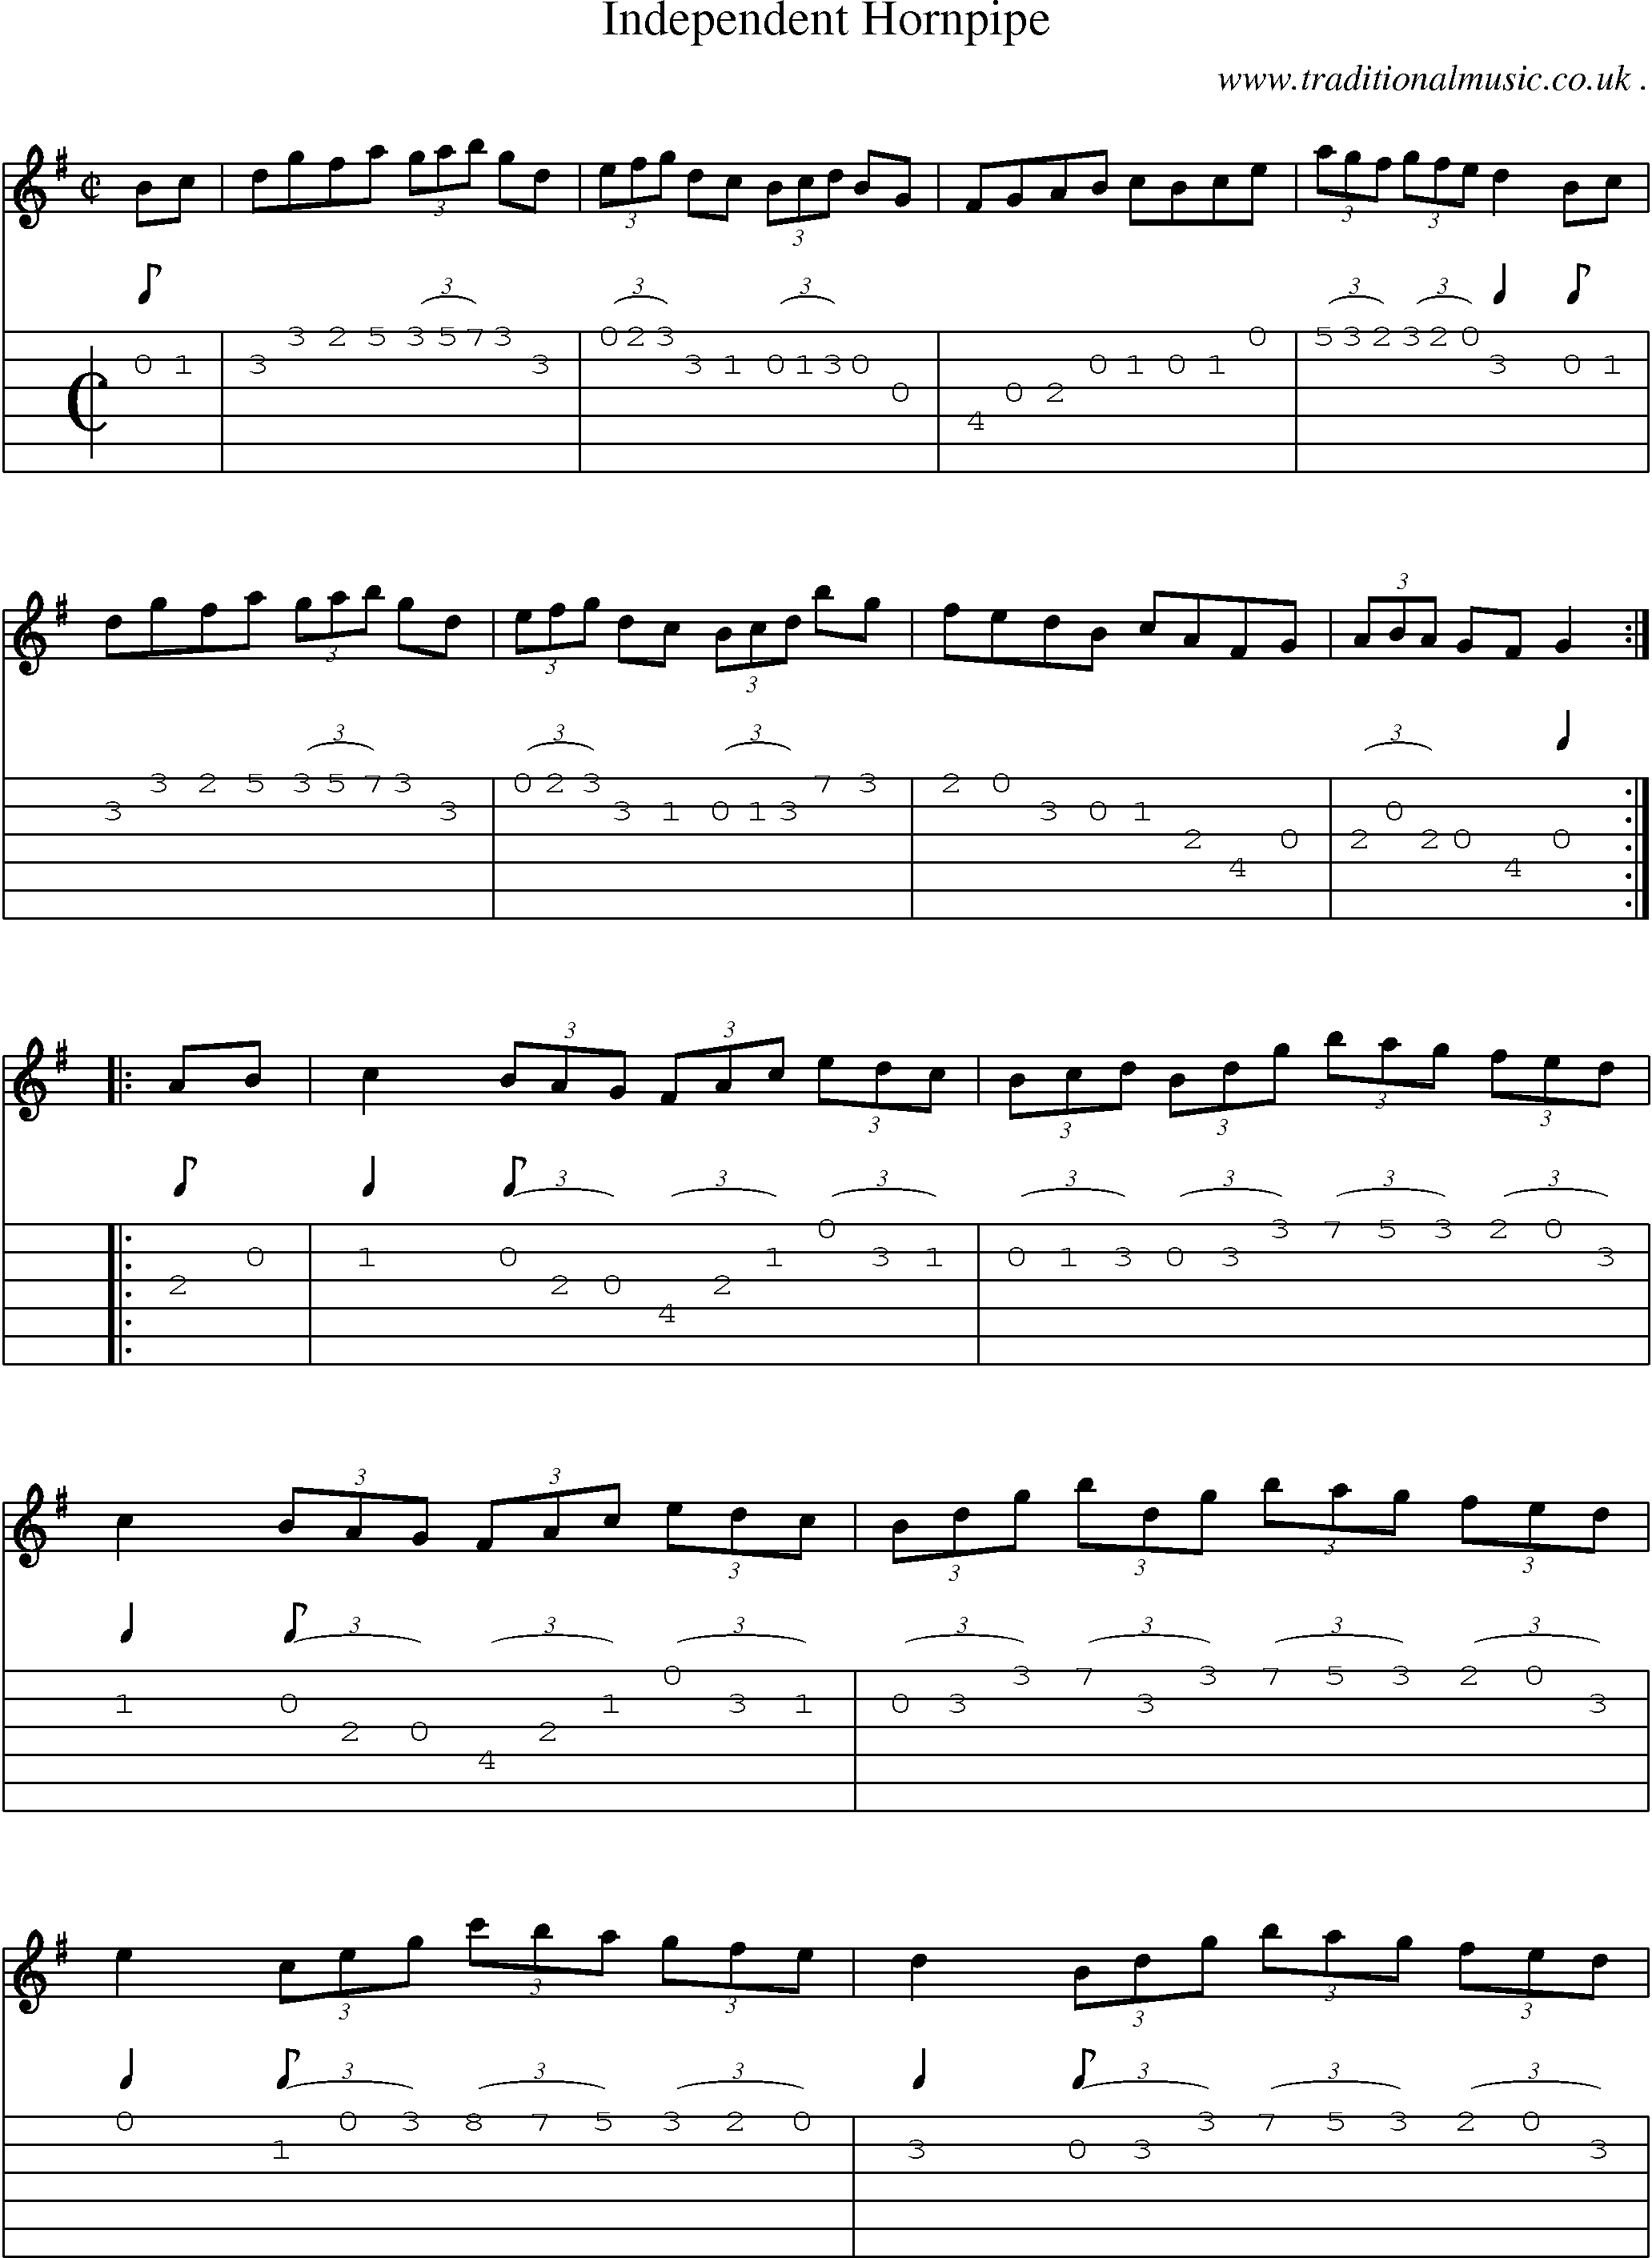 Sheet-Music and Guitar Tabs for Independent Hornpipe